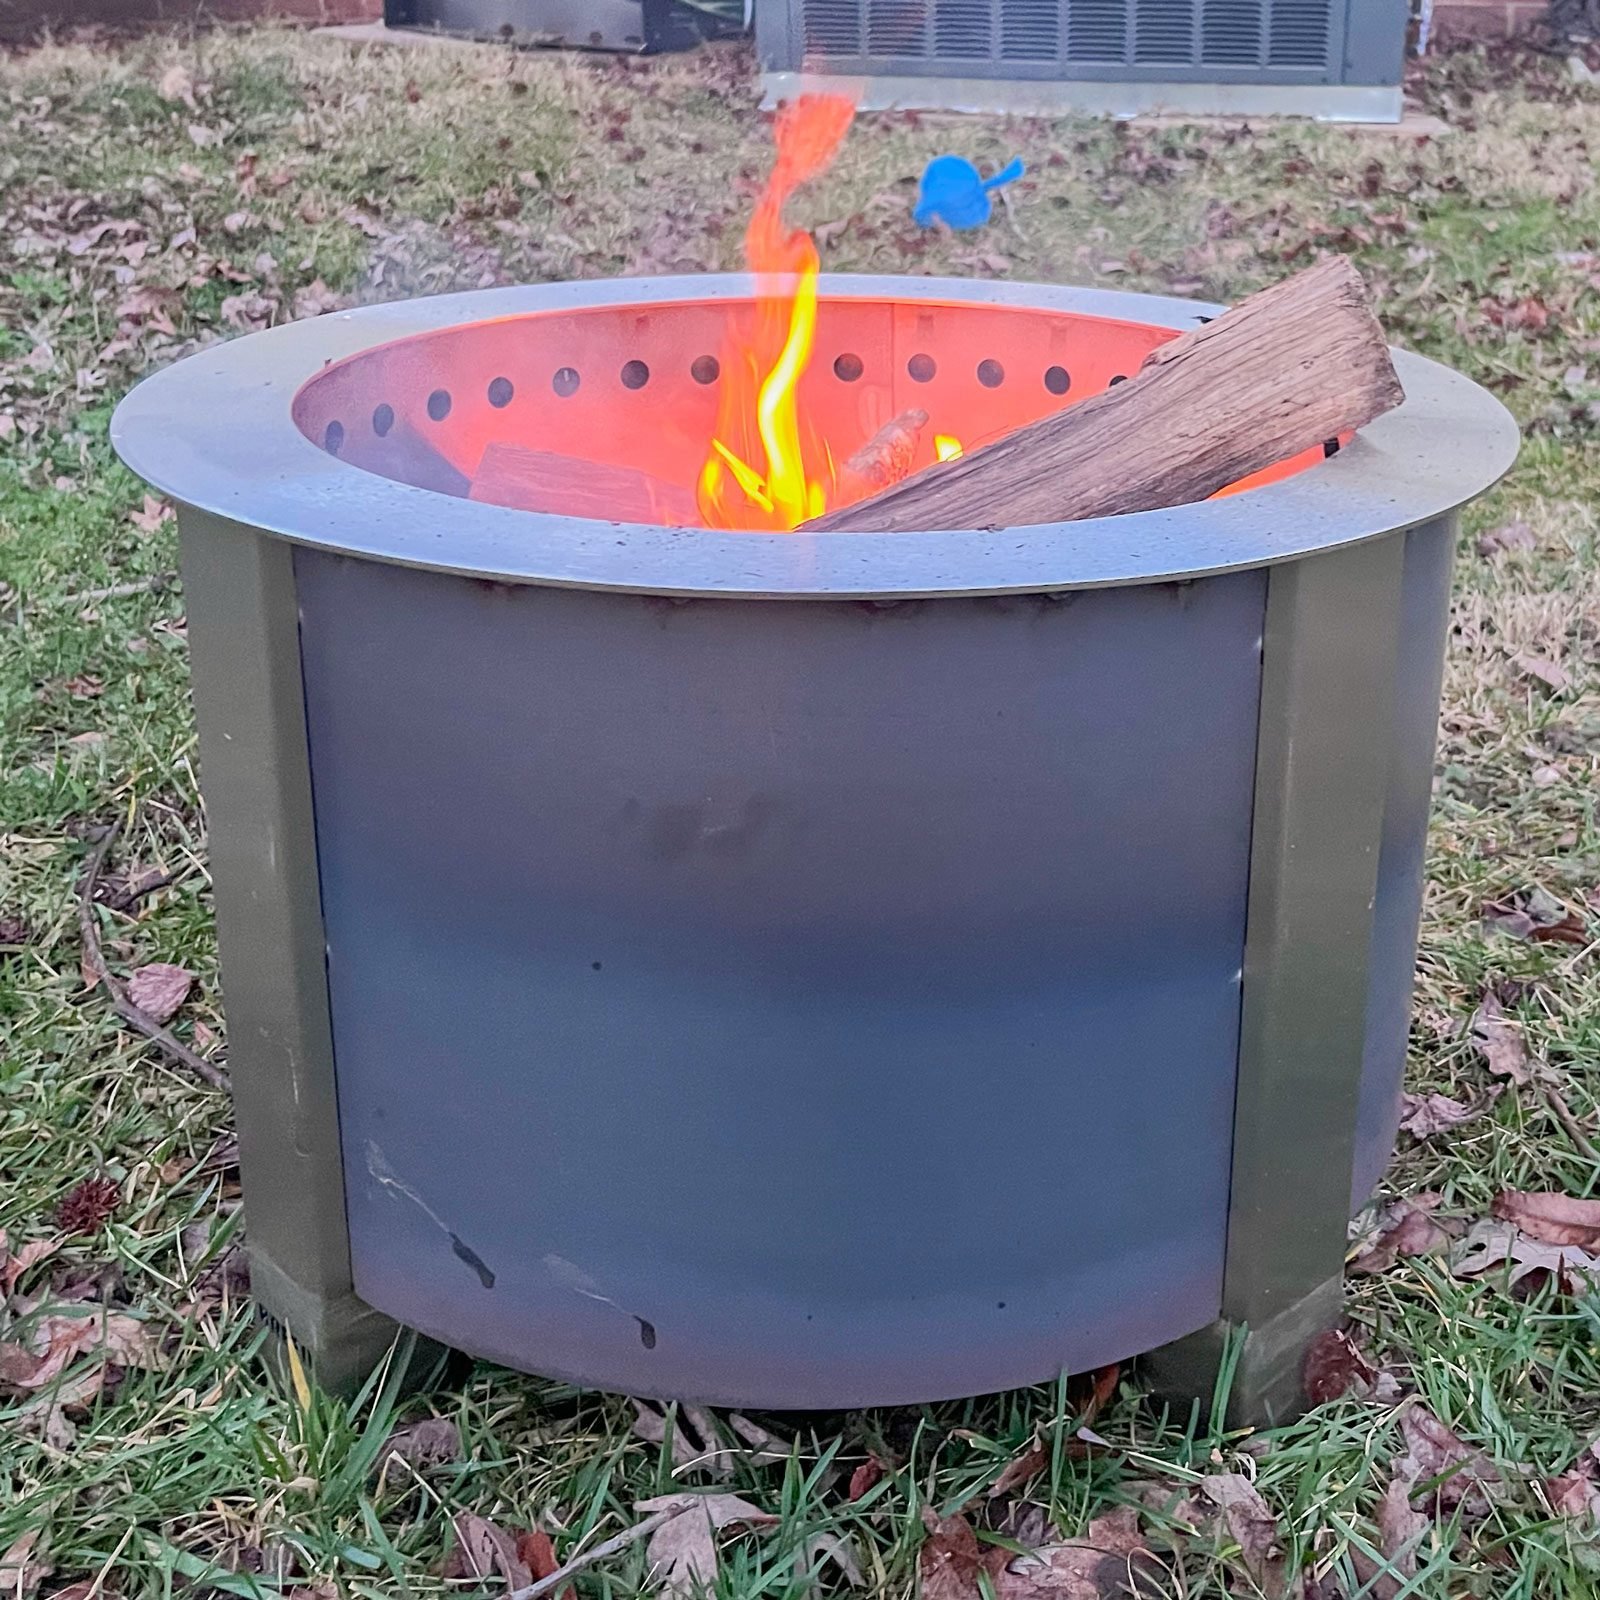 Is the Breeo Smokeless Fire Pit Worth the Price? An Honest Review